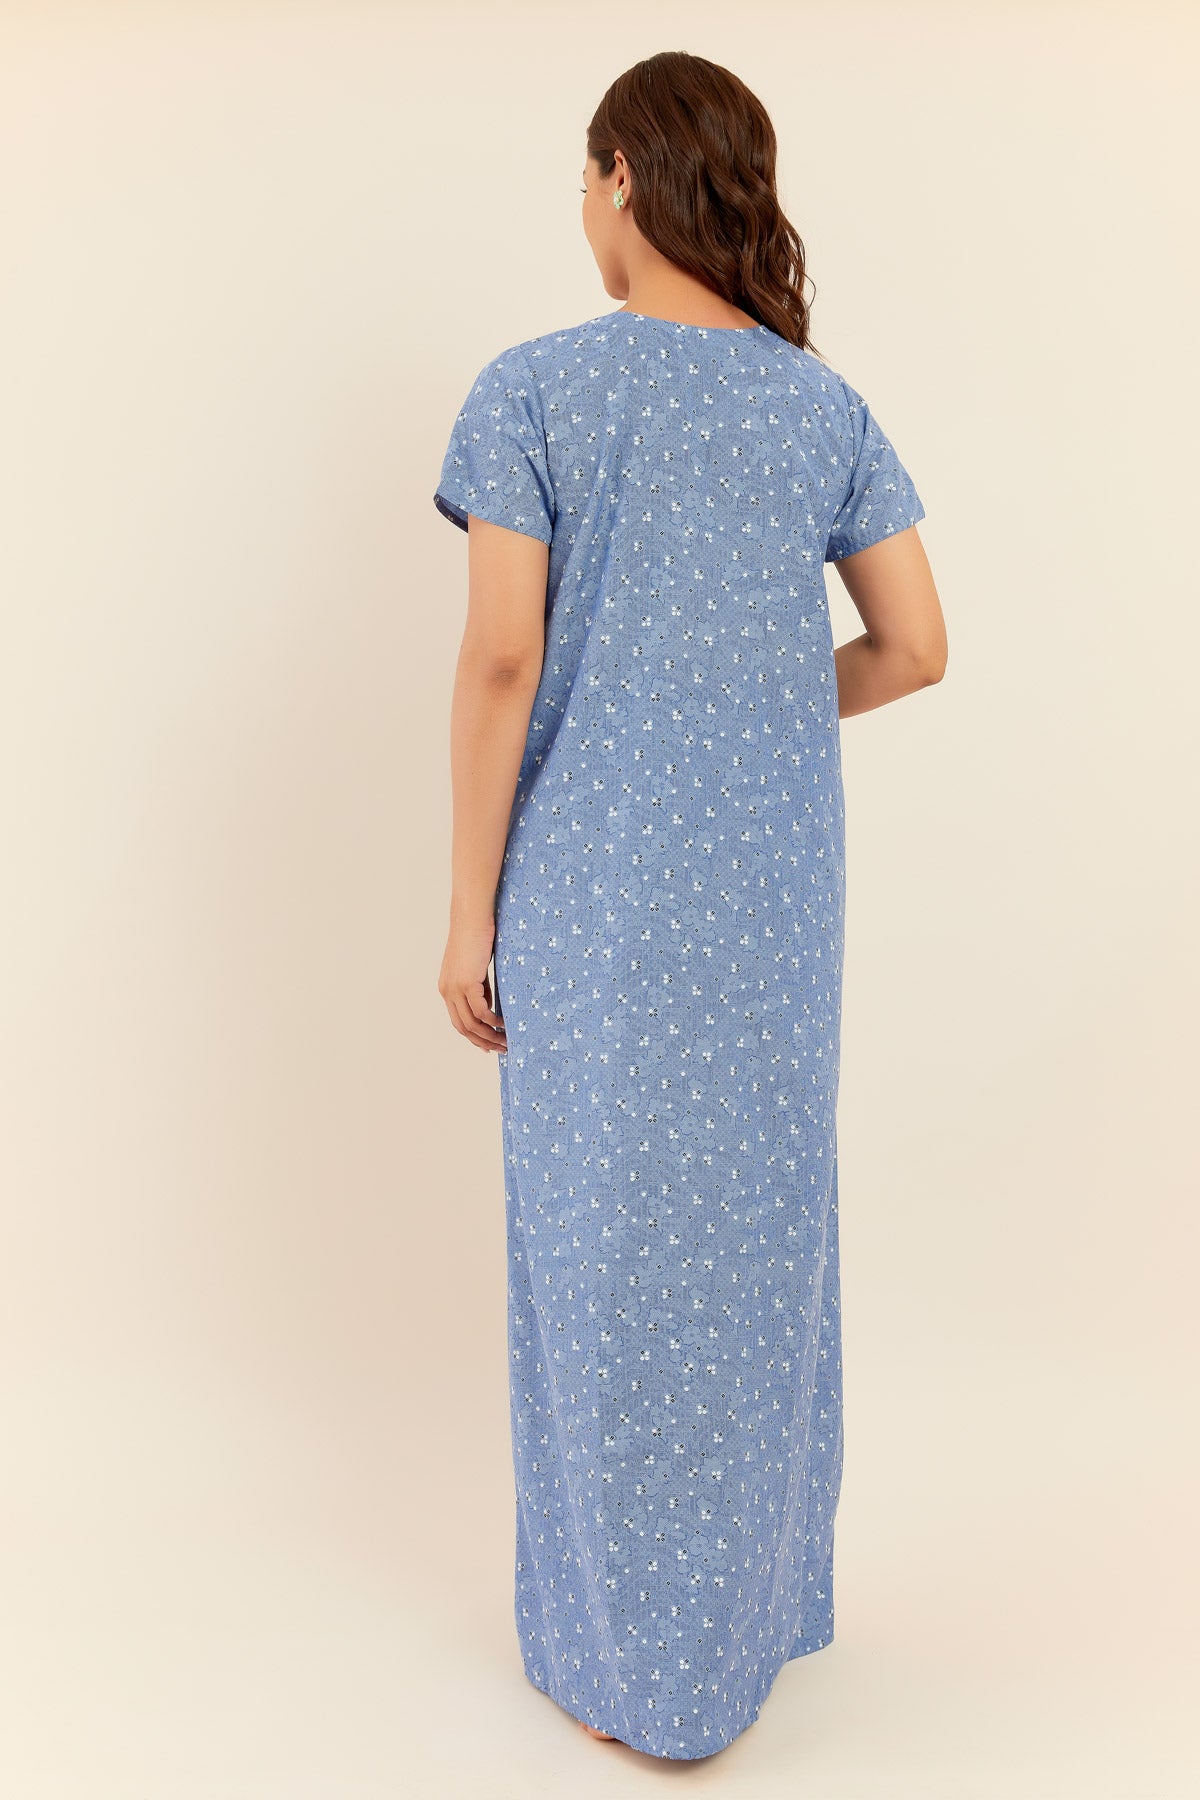 All Over Ditsy Geometric Print With Embroidered Yoke Nighty - Blue